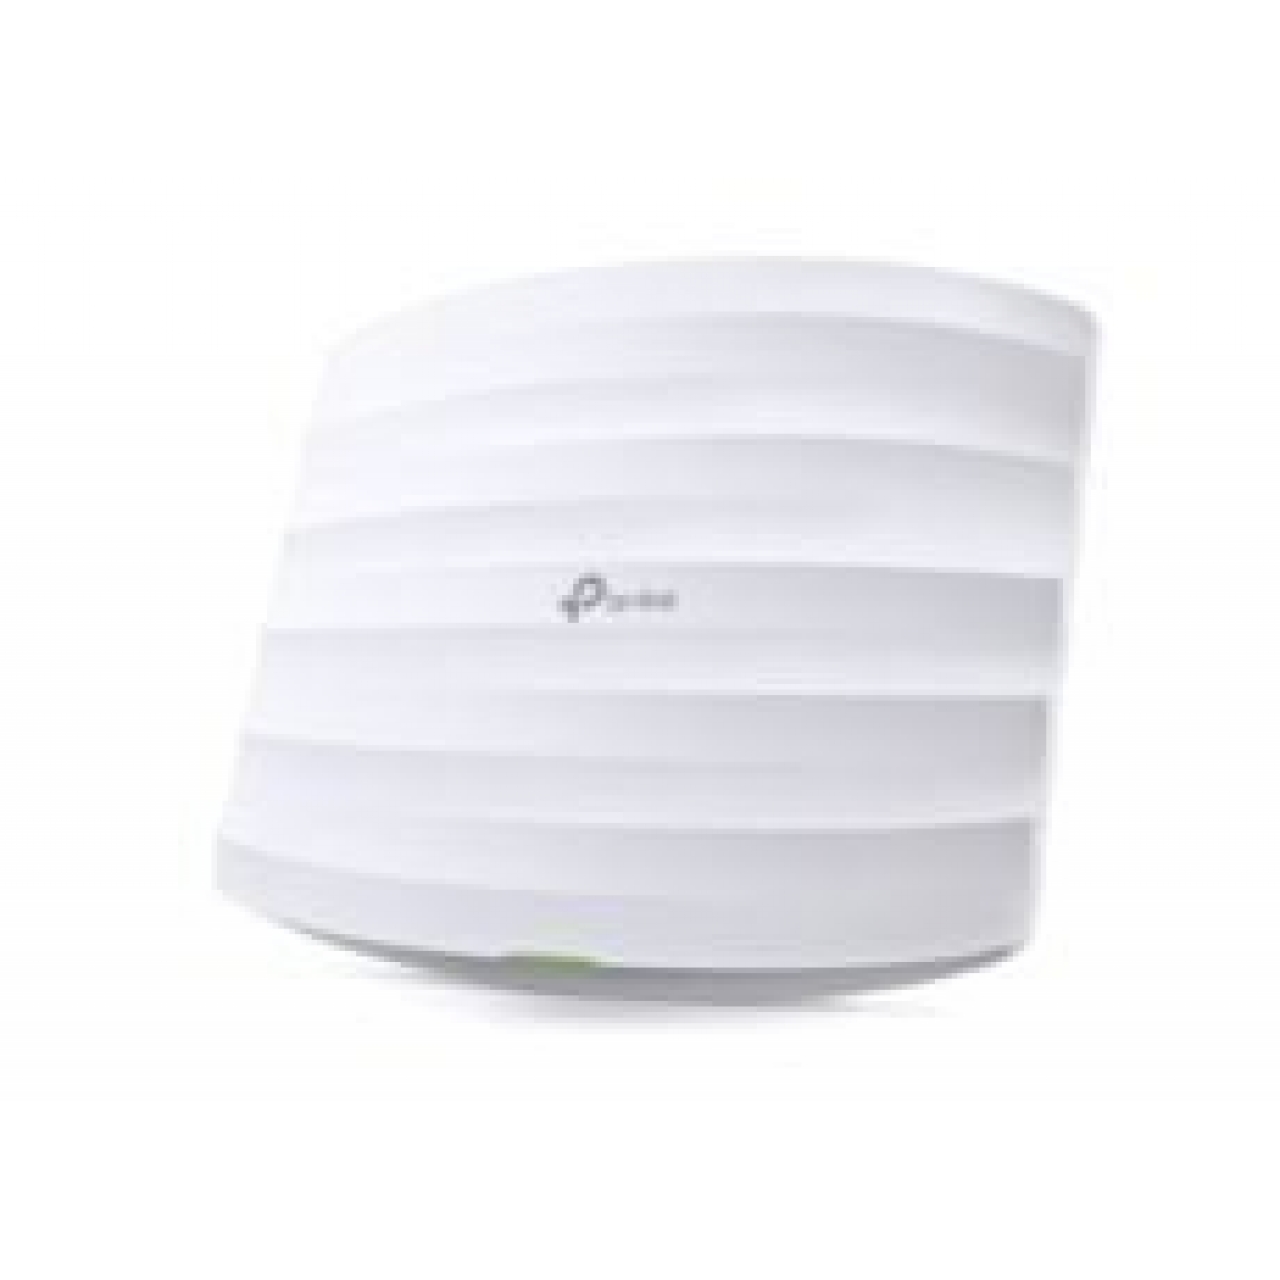 TP-LINK AC1900 Wireless Dual Band Gigabit Ceiling Mount Access Point